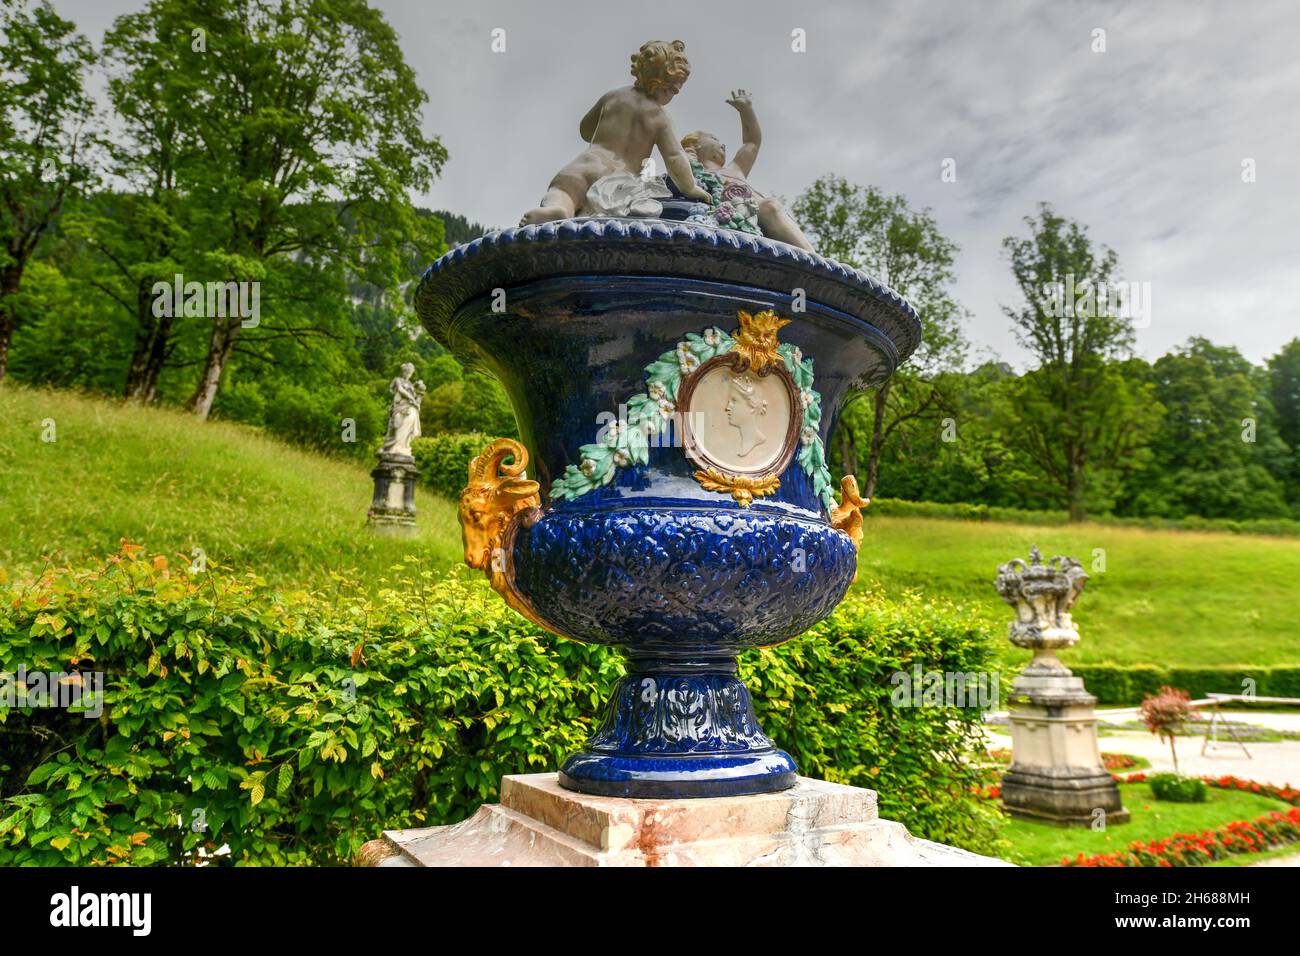 Ettal, Germany - July 5, 2021: Linderhof Palace in Bavaria, Germany, one of the castles of former king Ludwig II. Stock Photo